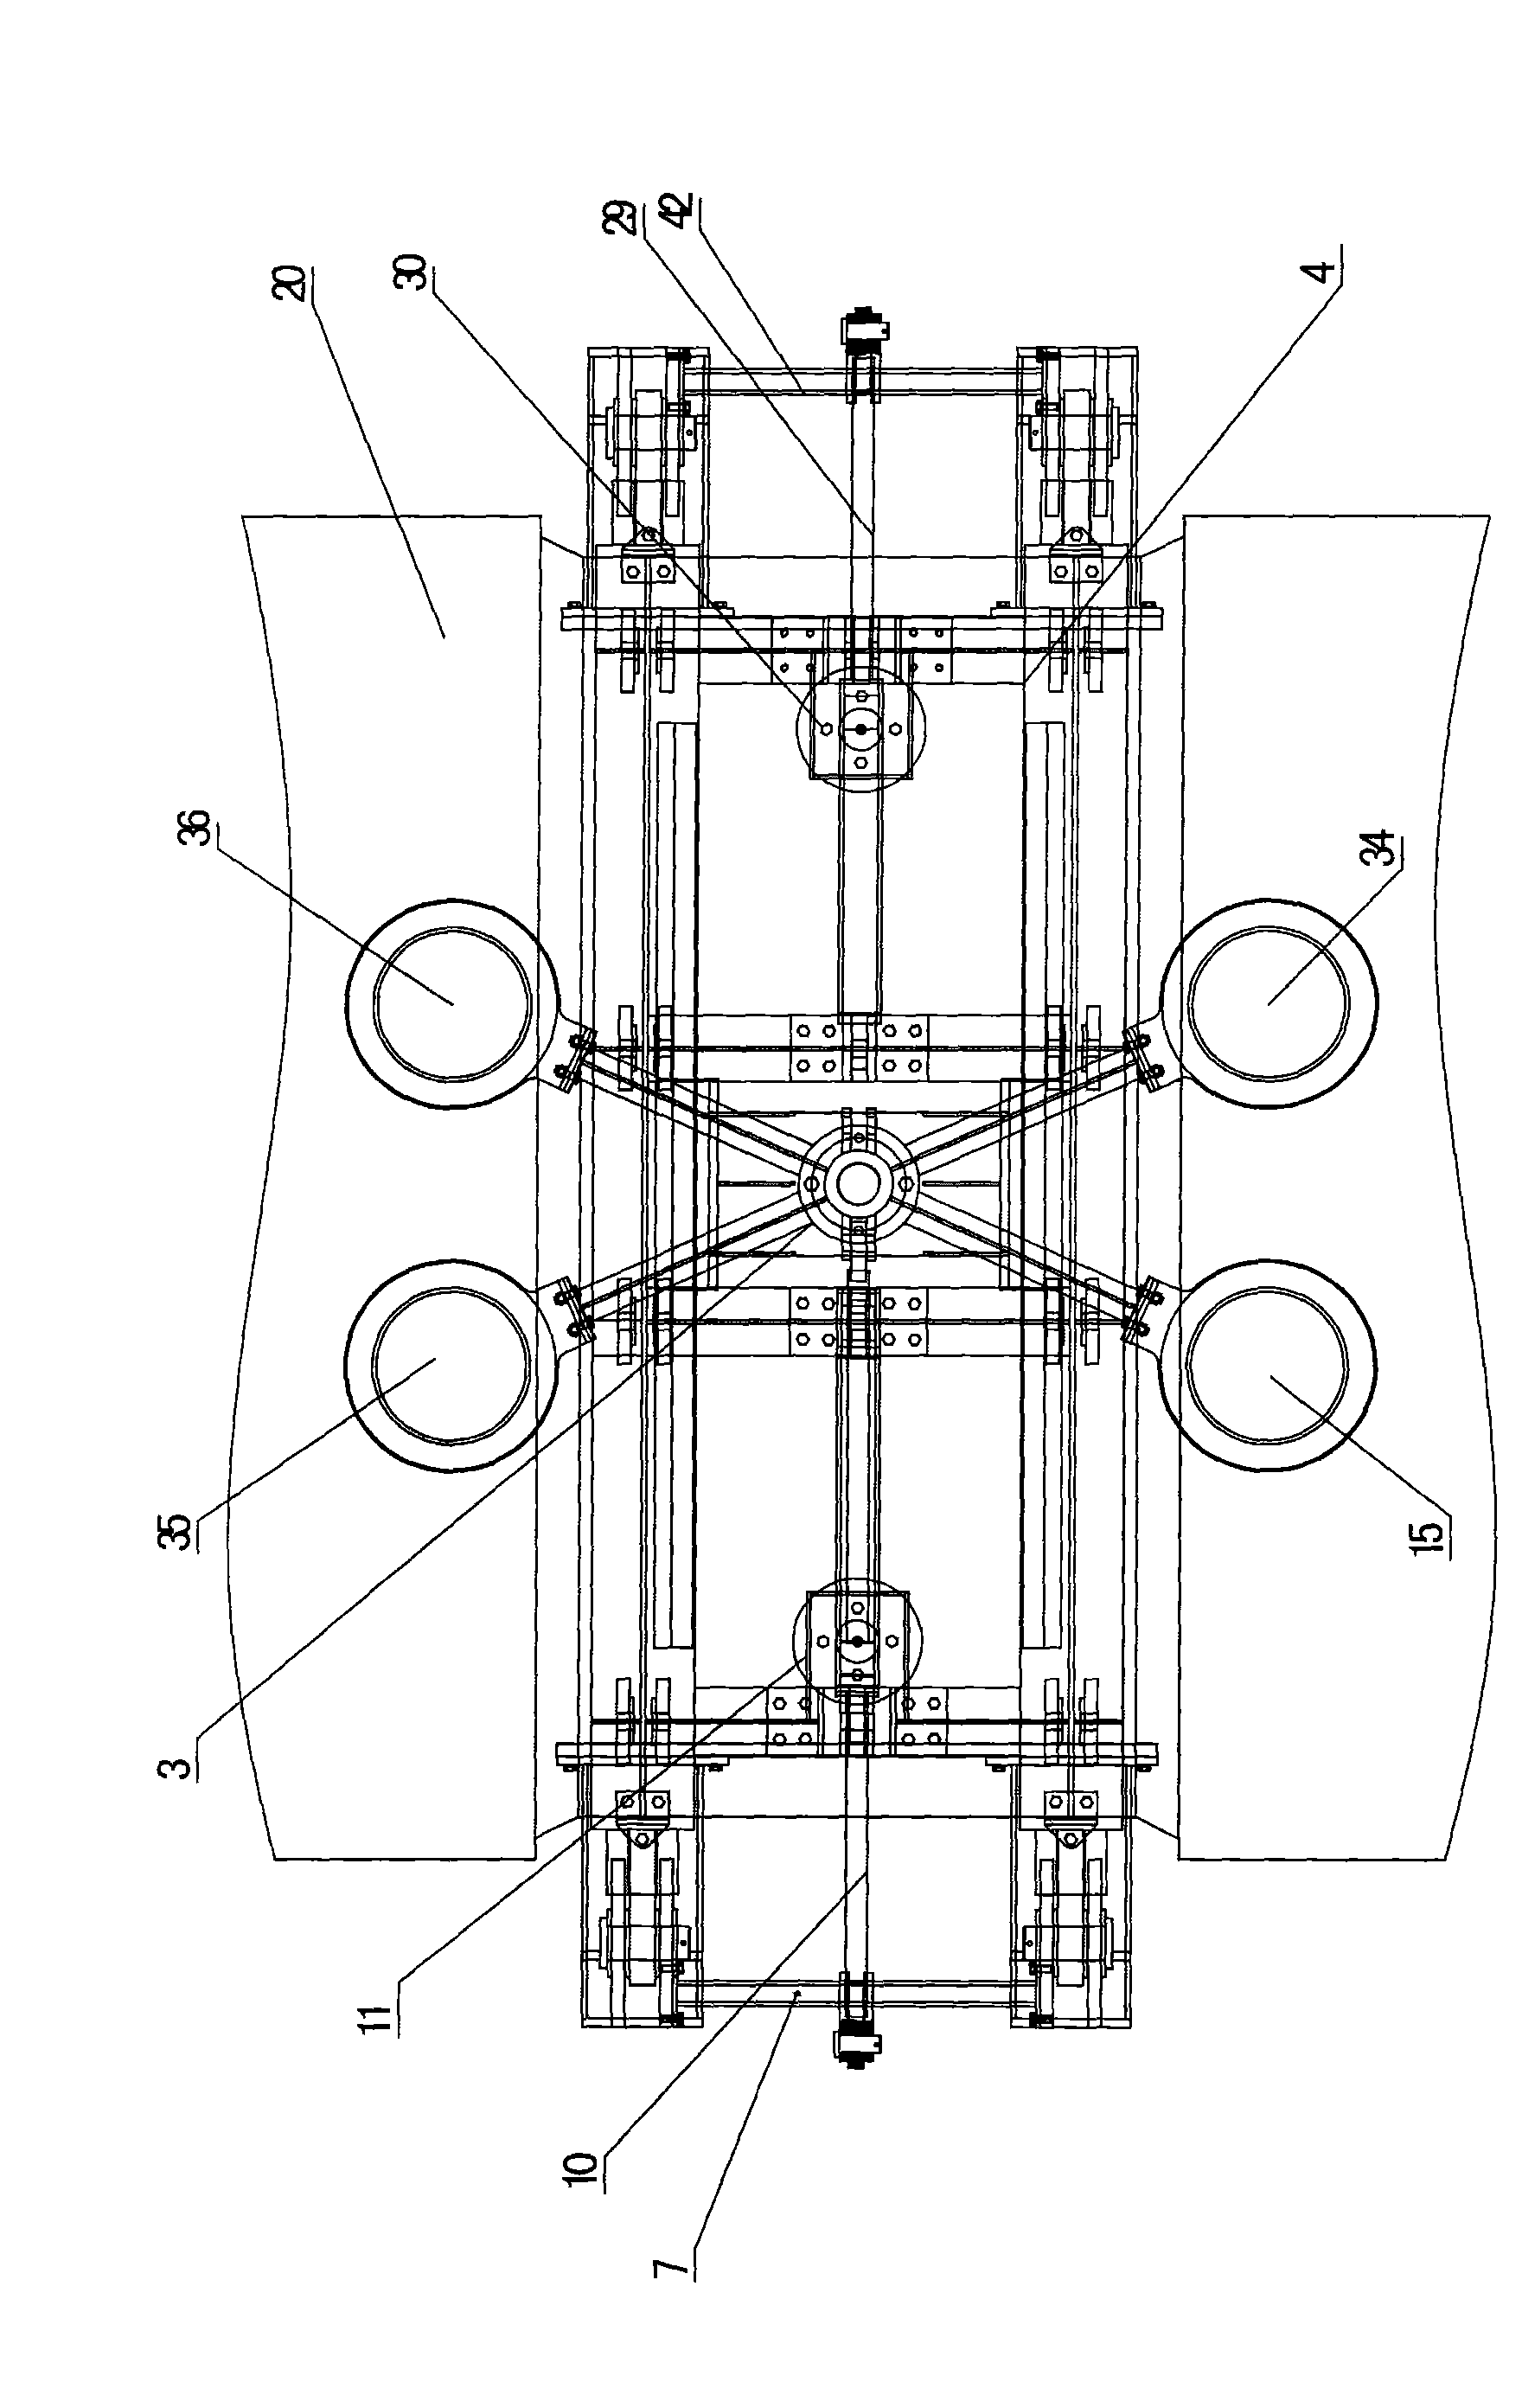 Pier-encircling clamp device